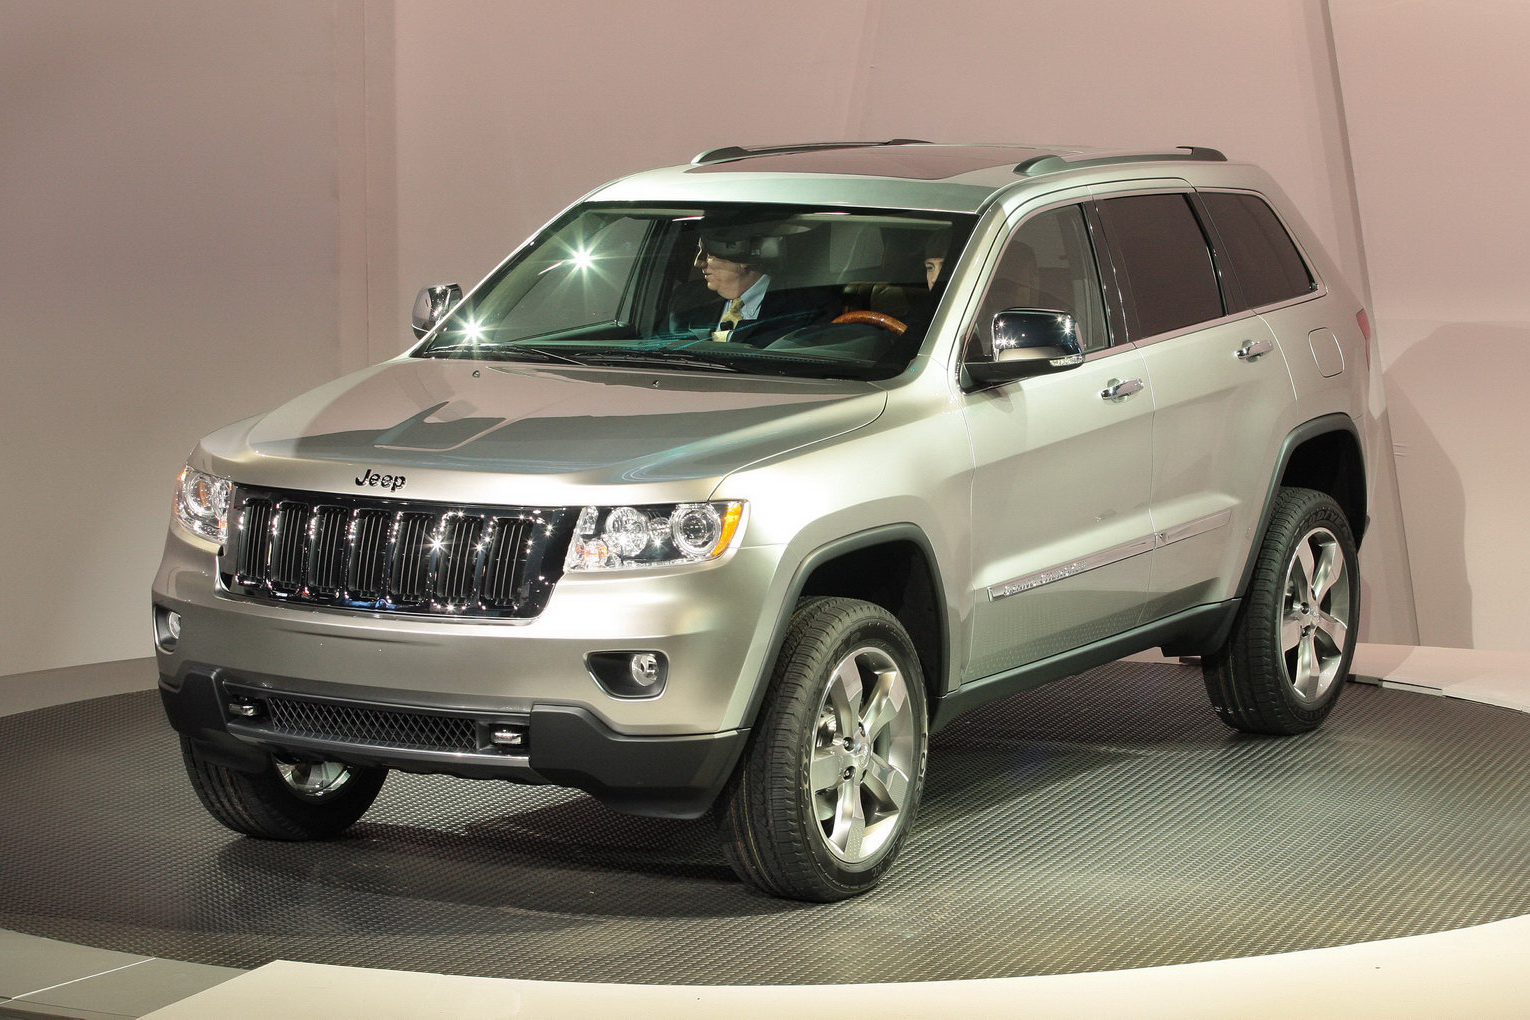 2011 Jeep Grand Cherokee Prices Announced, Starts from 32,995